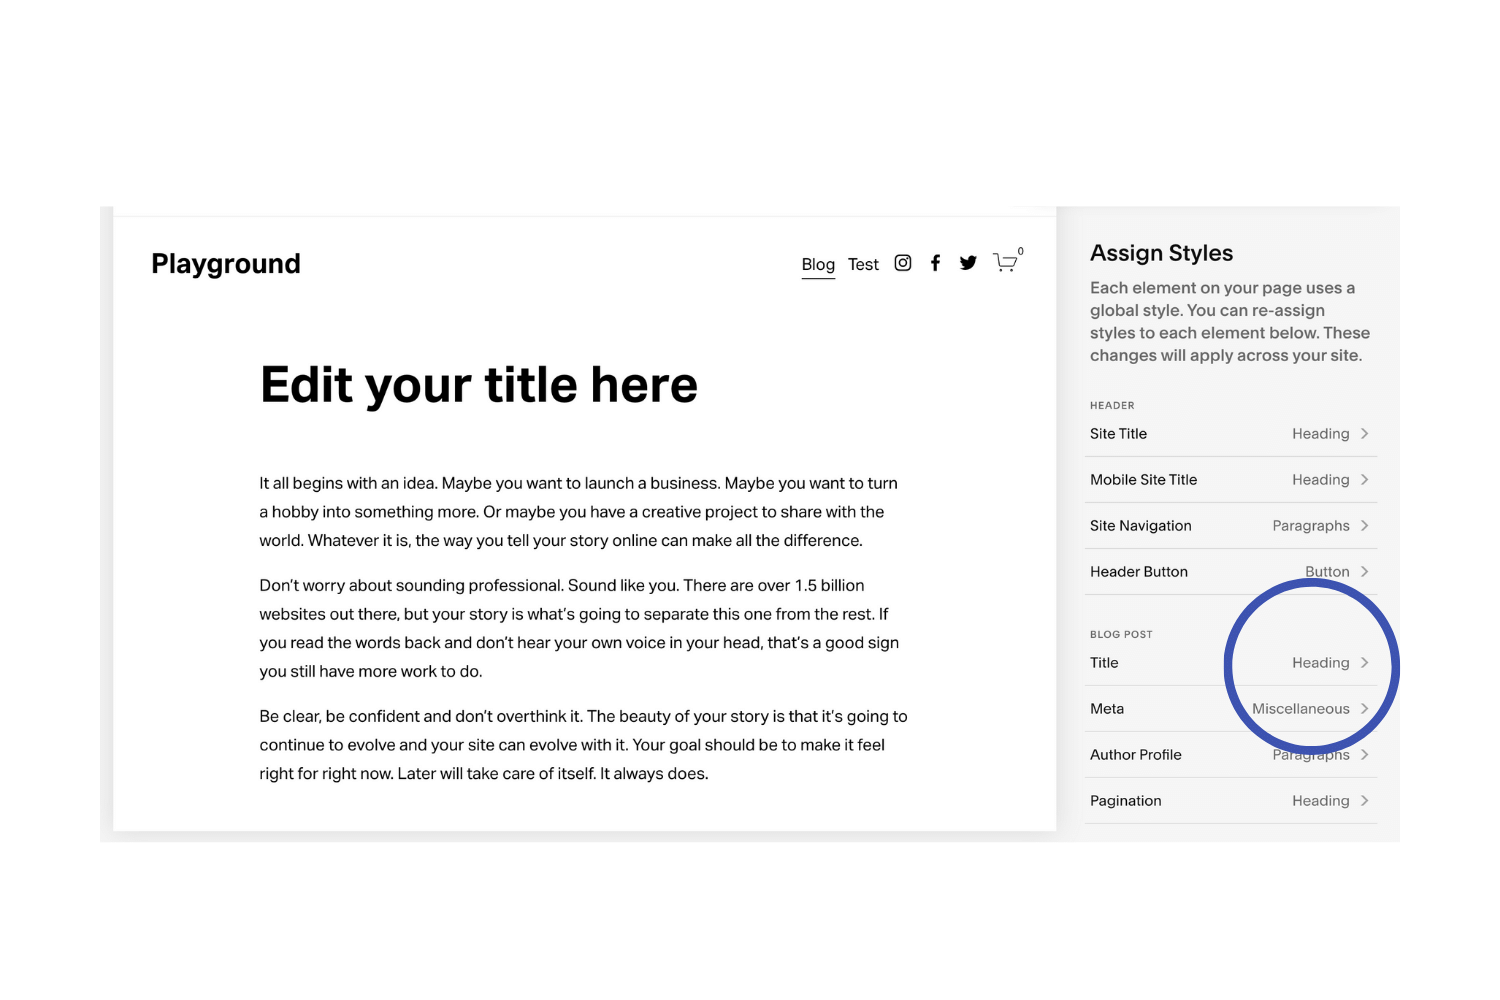 Set your blog titles to be Header 1s (Copy)